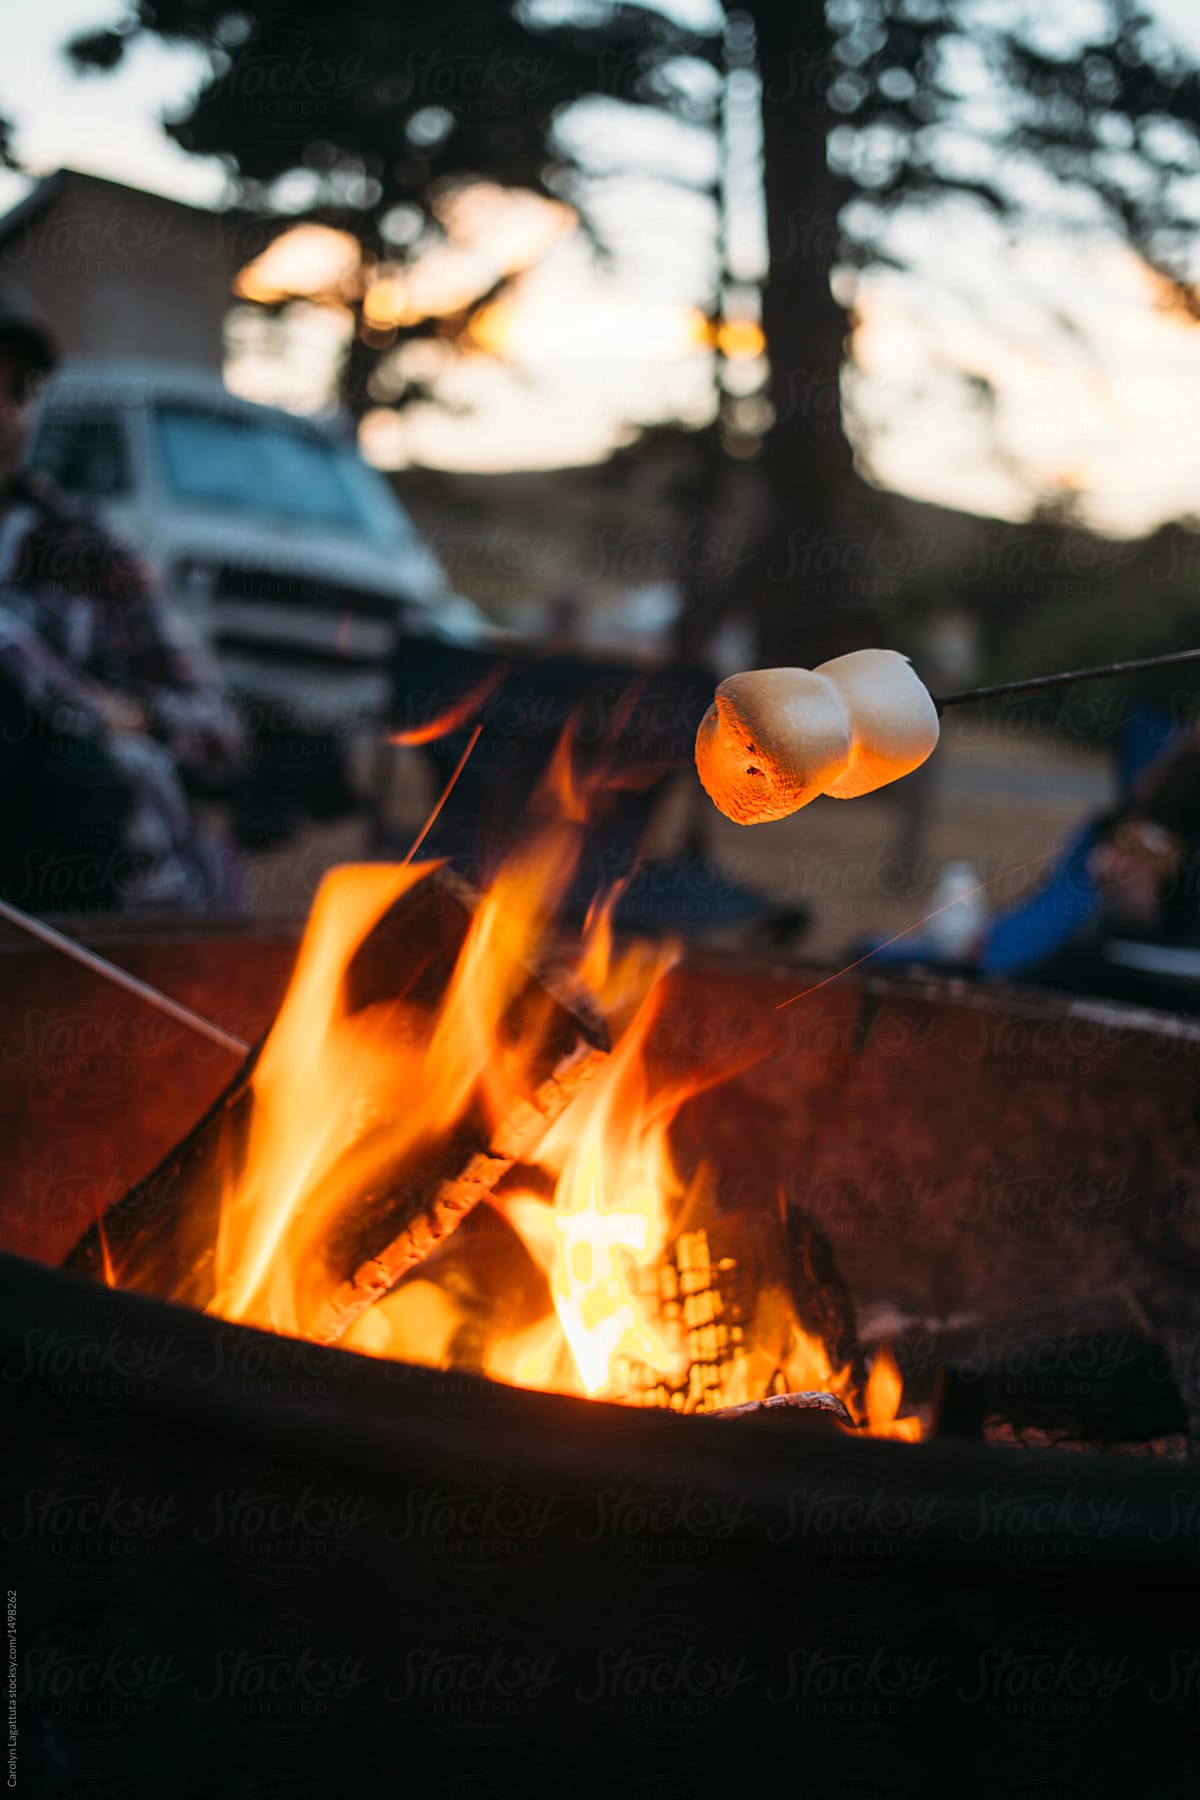 Roasting marshmallows by the campfire